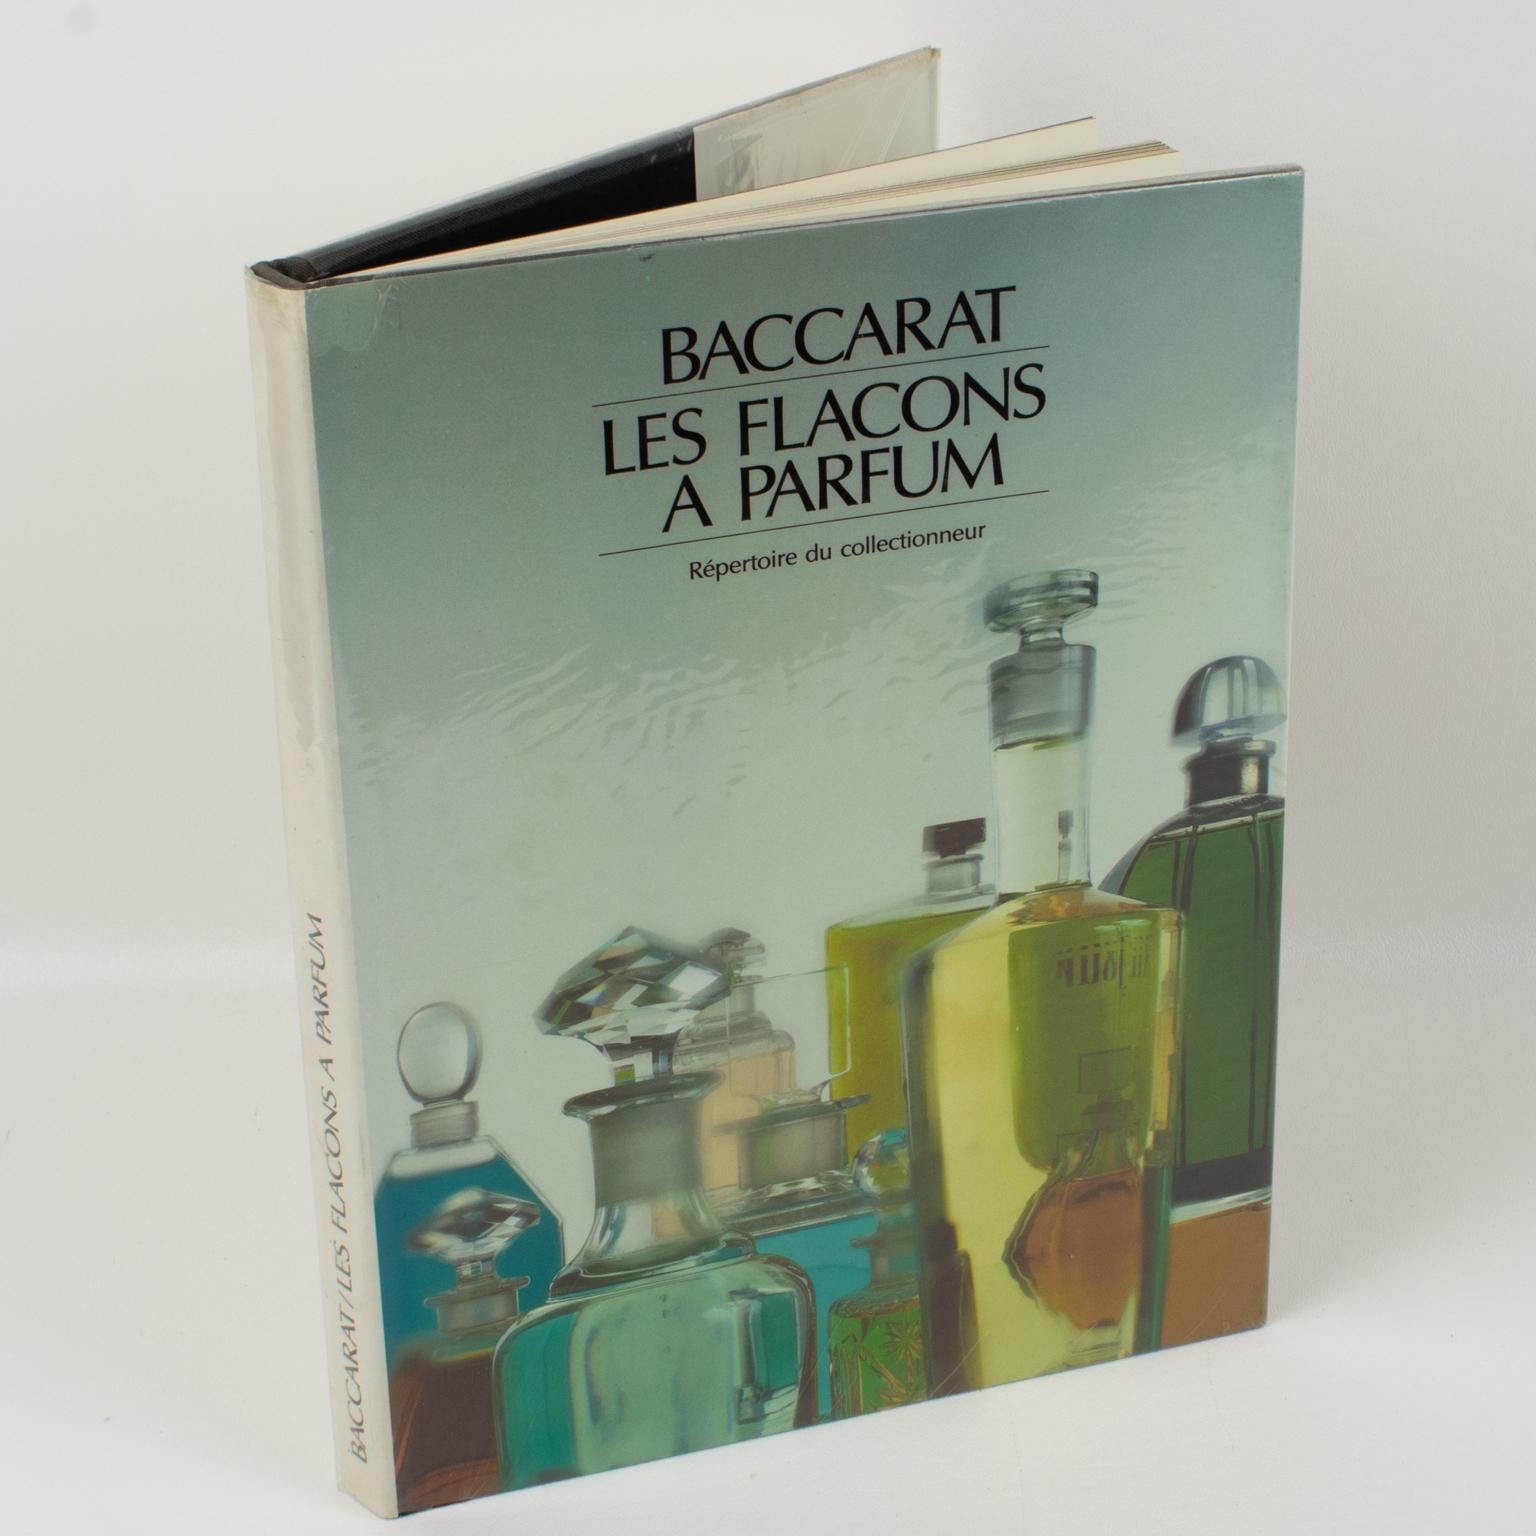 Baccarat, Les Flacons a Parfum - The Perfume Bottles, by Compagnie des Cristalleries de Baccarat and edited by Henri Addor and Associés, Paris in 1986.
Illustrated with 71 wash drawings, 602 line drawings, 161 black and white photographs, and 57